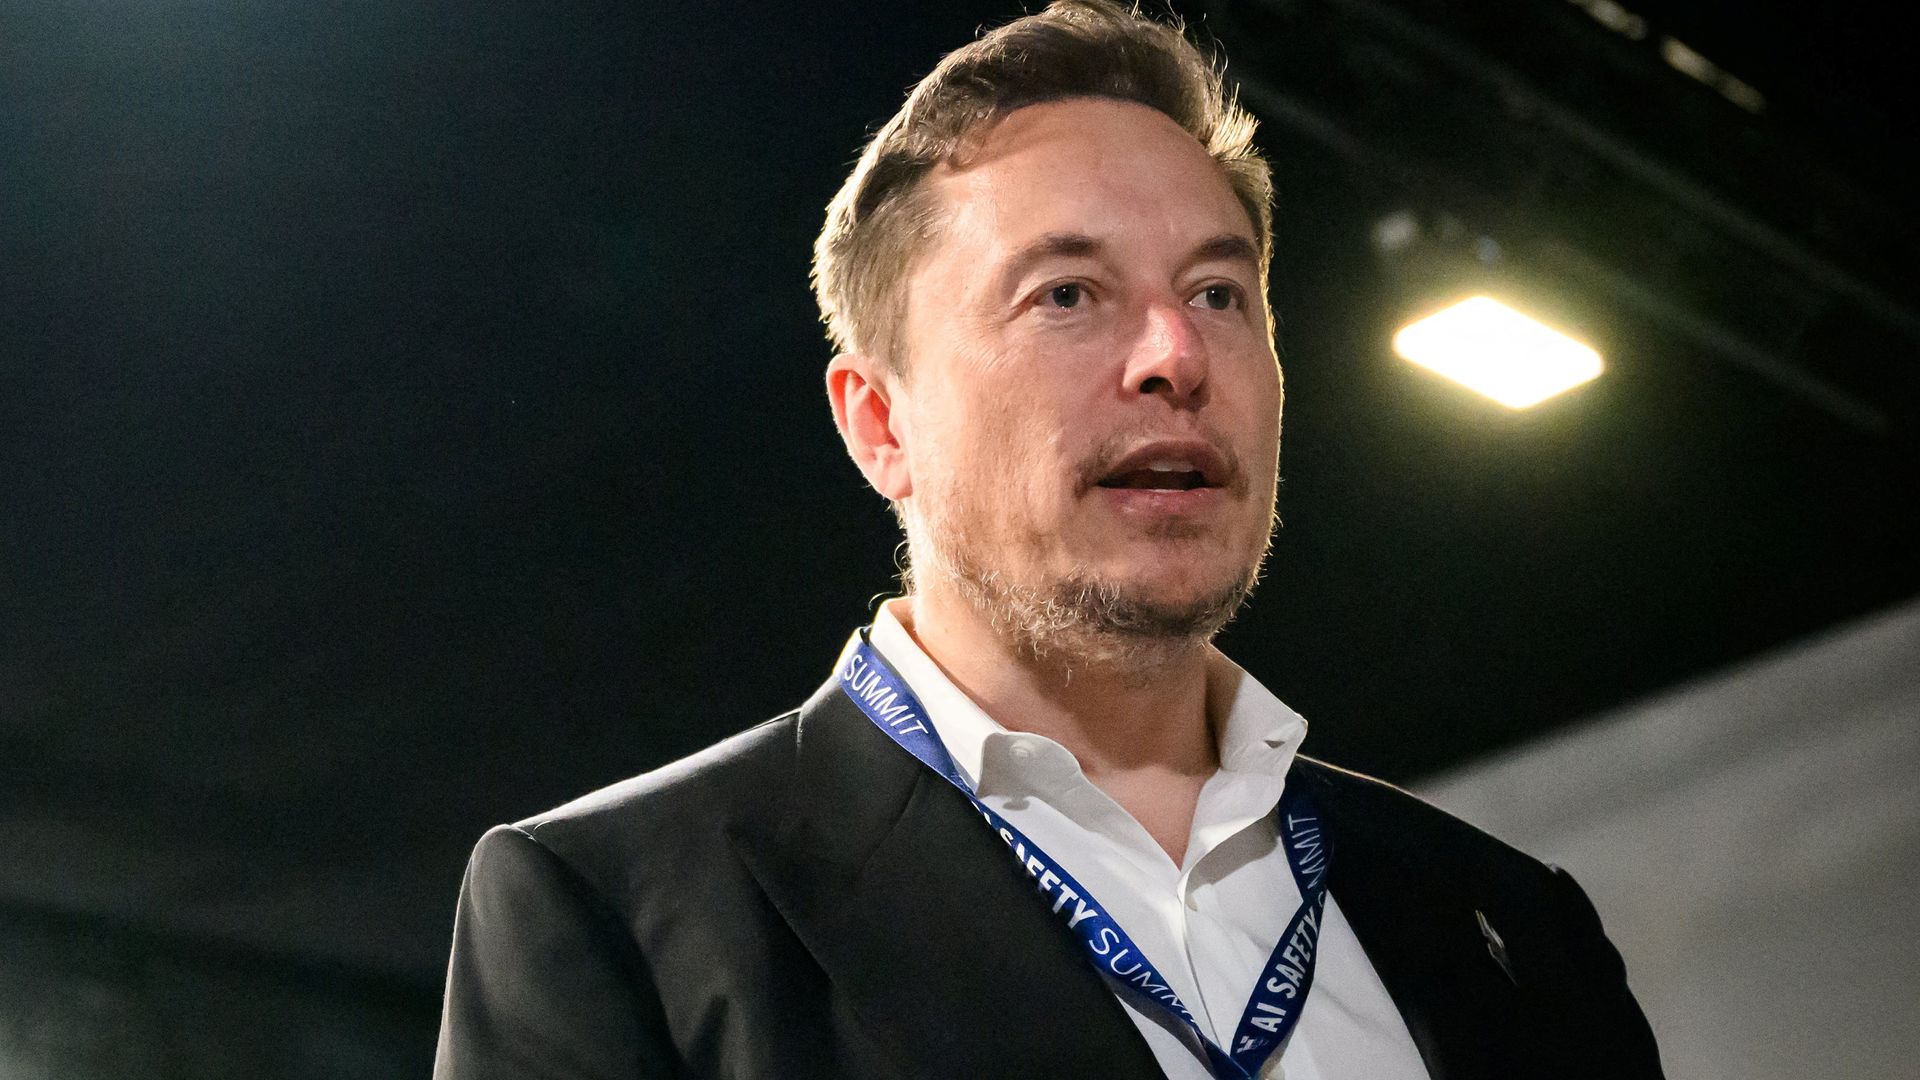 X owner Elon Musk accuses advertisers of blackmailing him